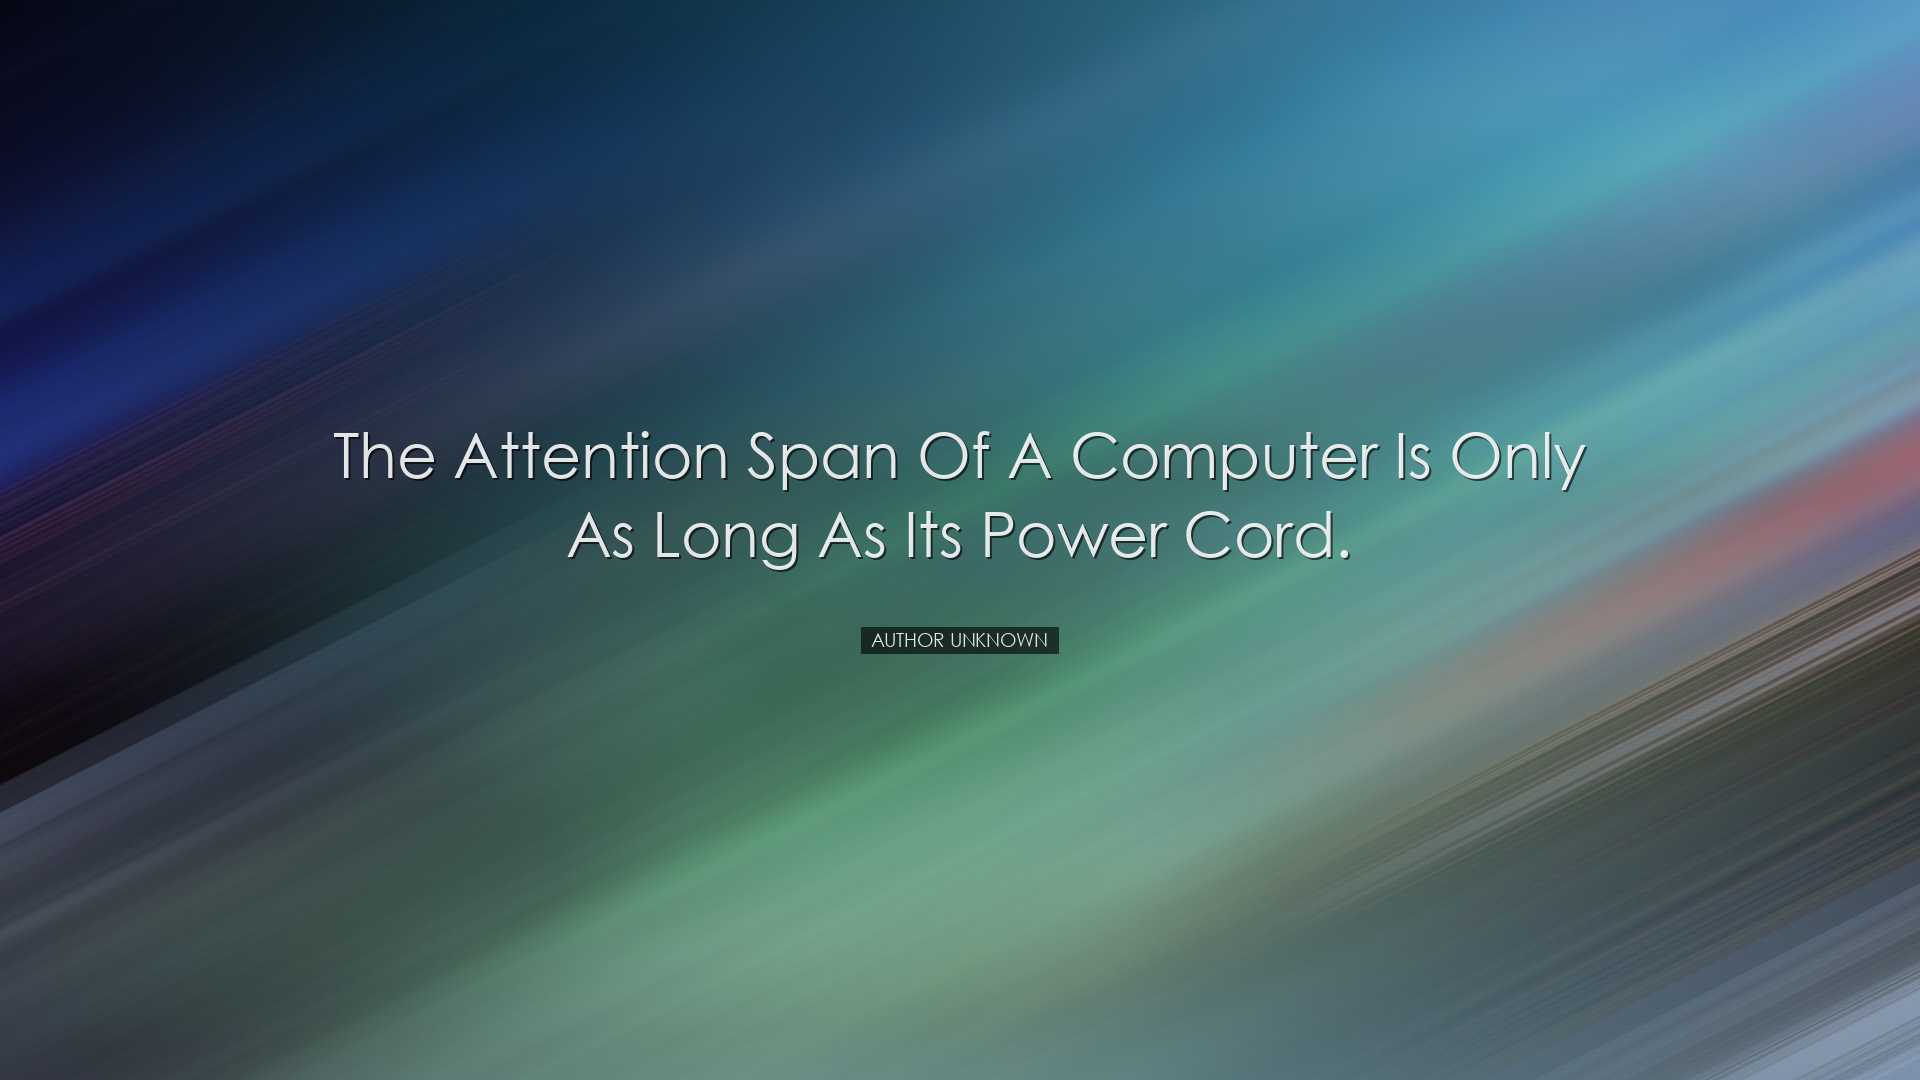 The attention span of a computer is only as long as its power cord